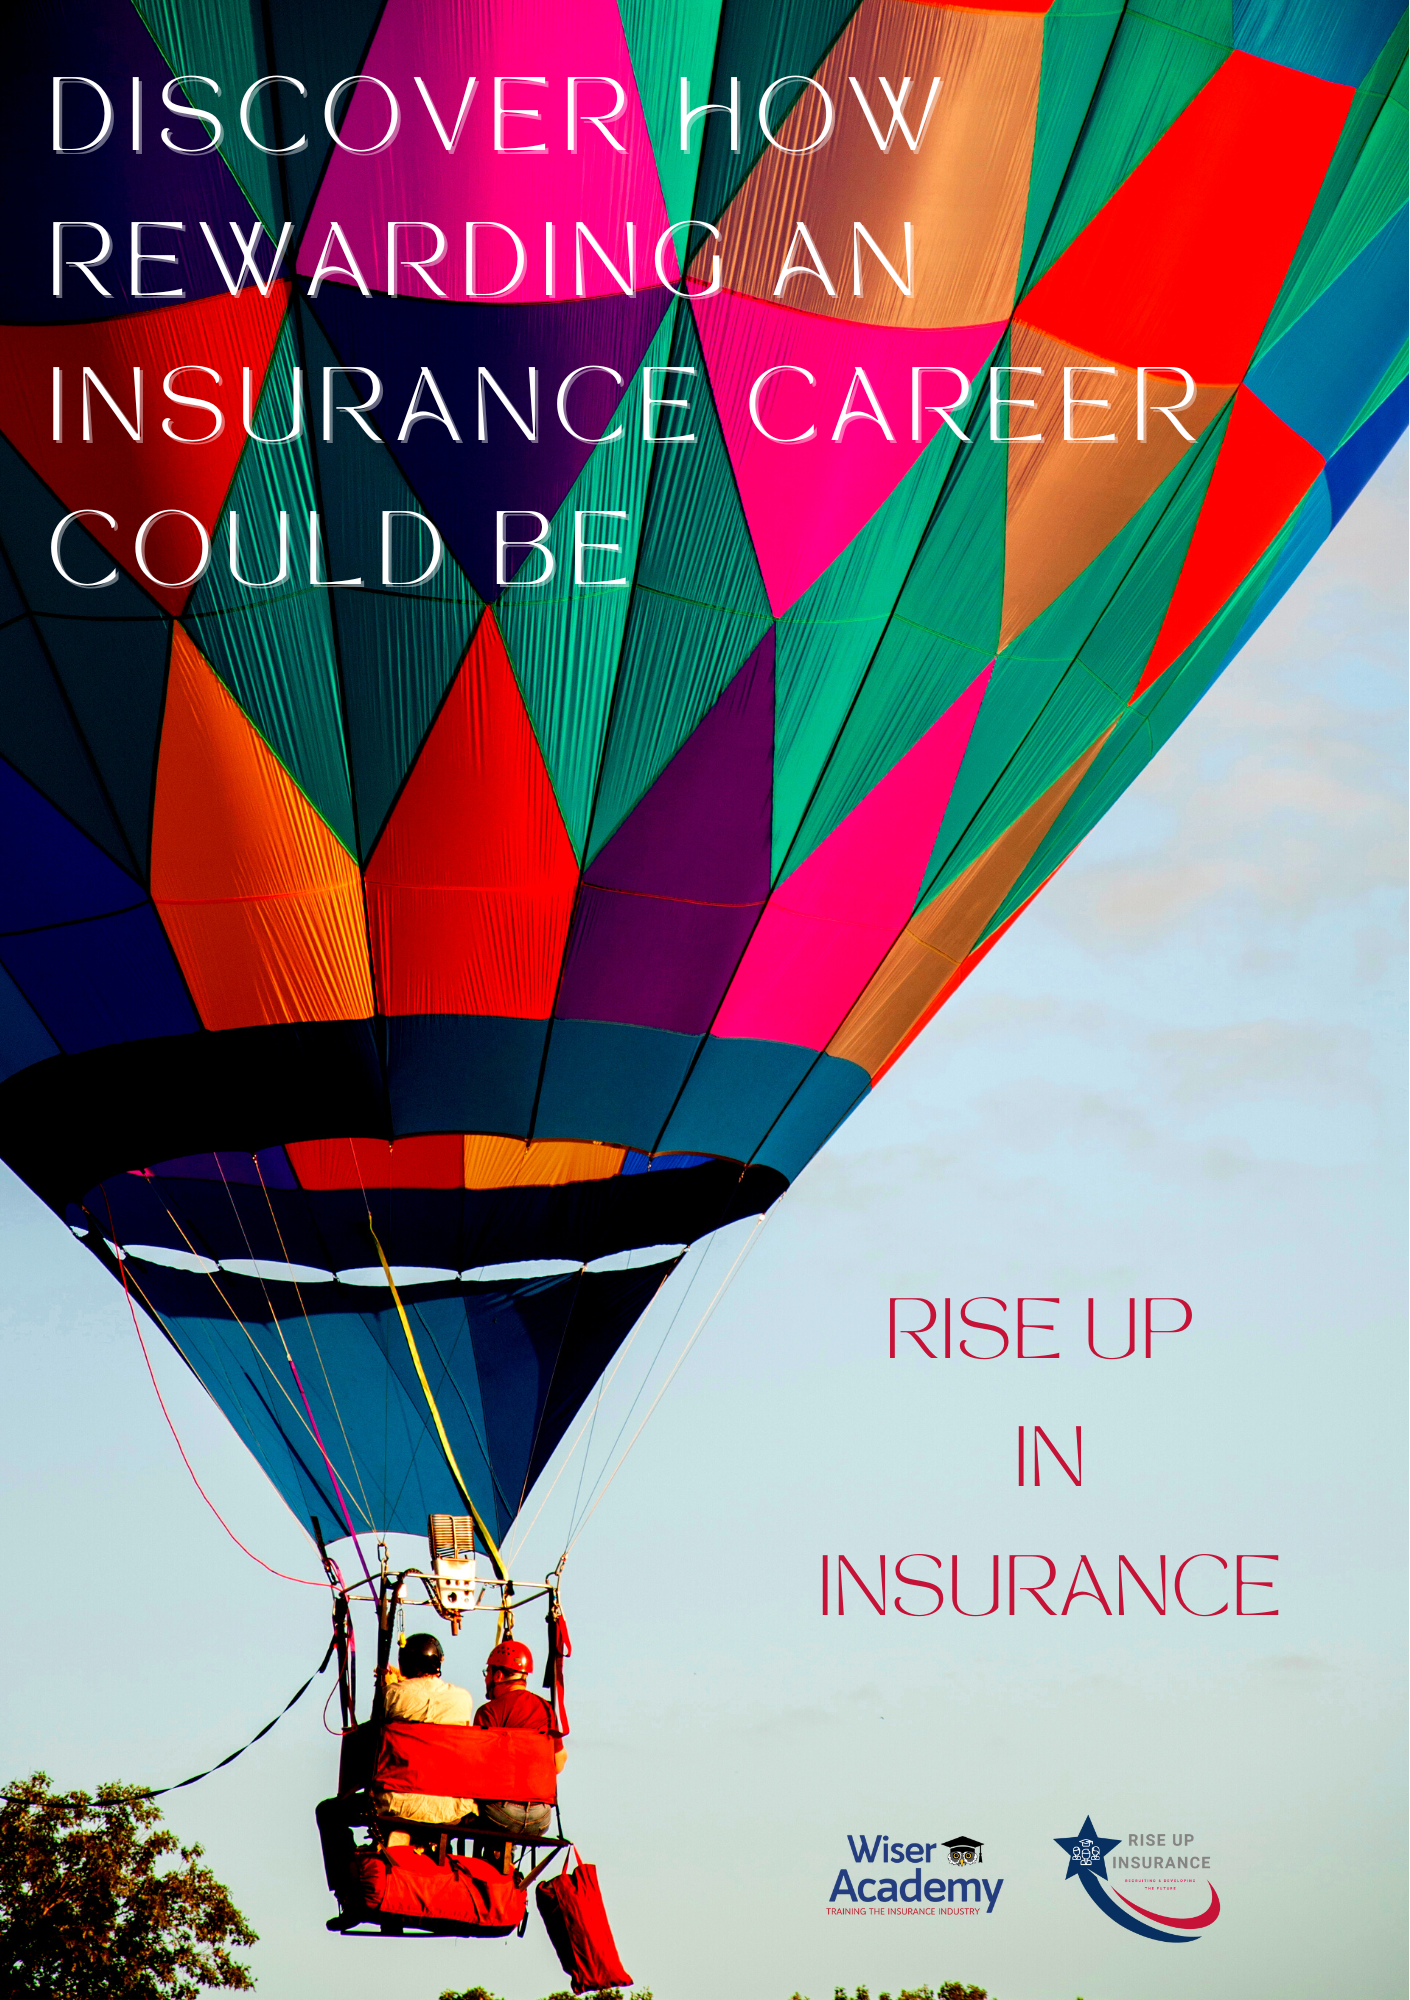 Bootcamp for for future insurance professionals